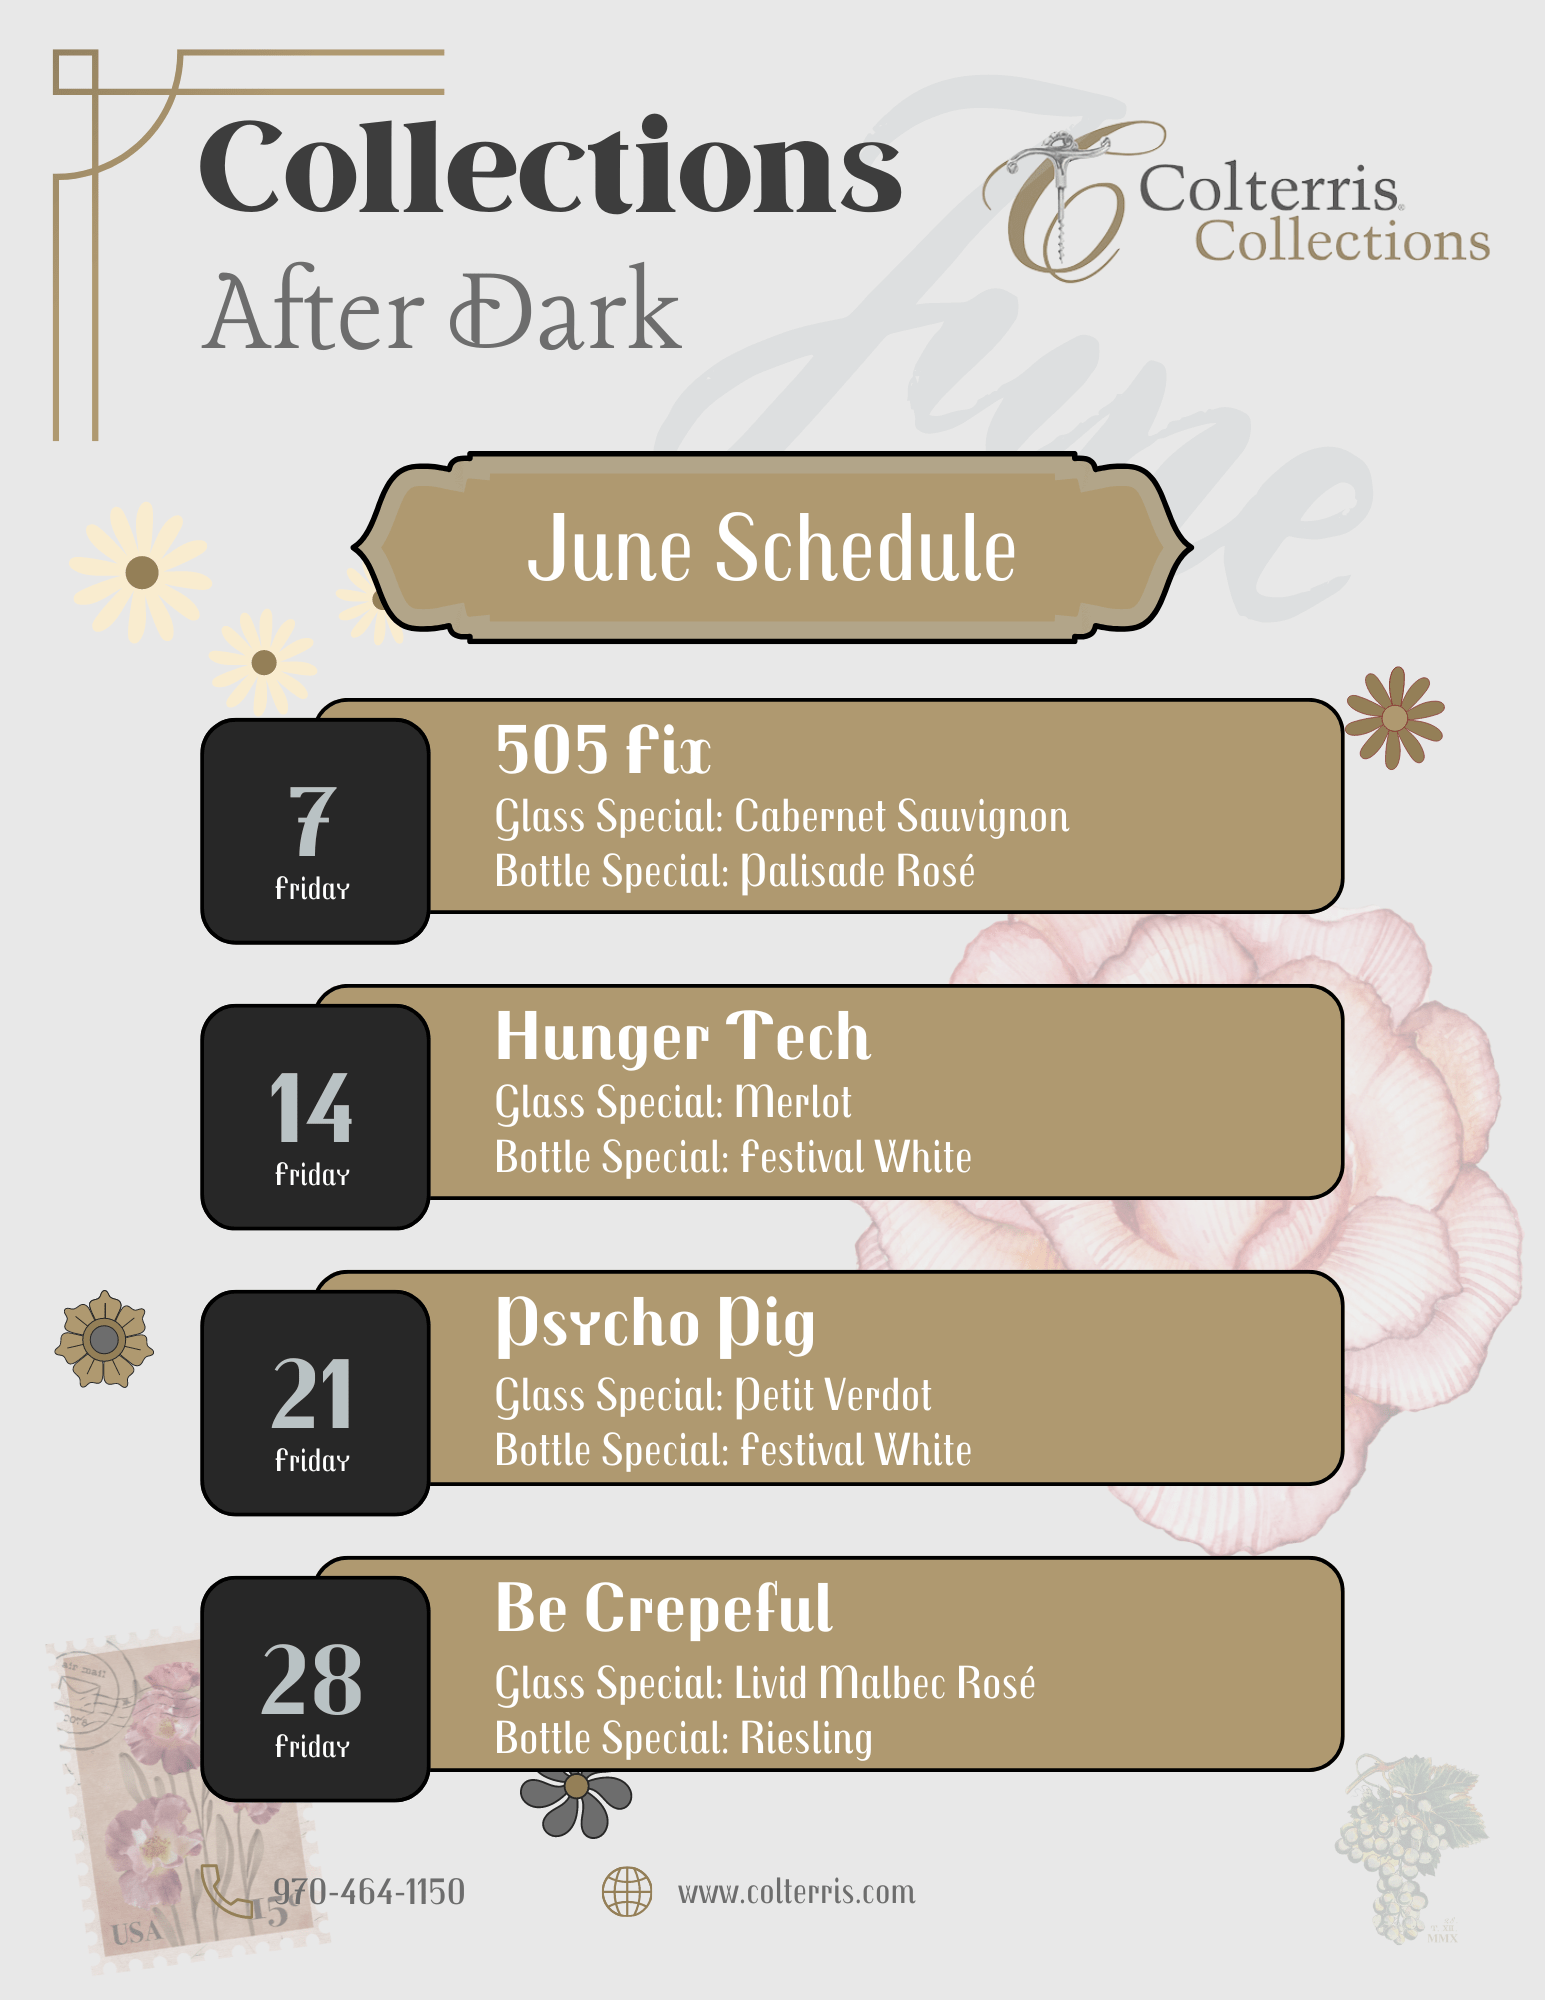 Colterris Collections After Dark June Food Truck Schedule.